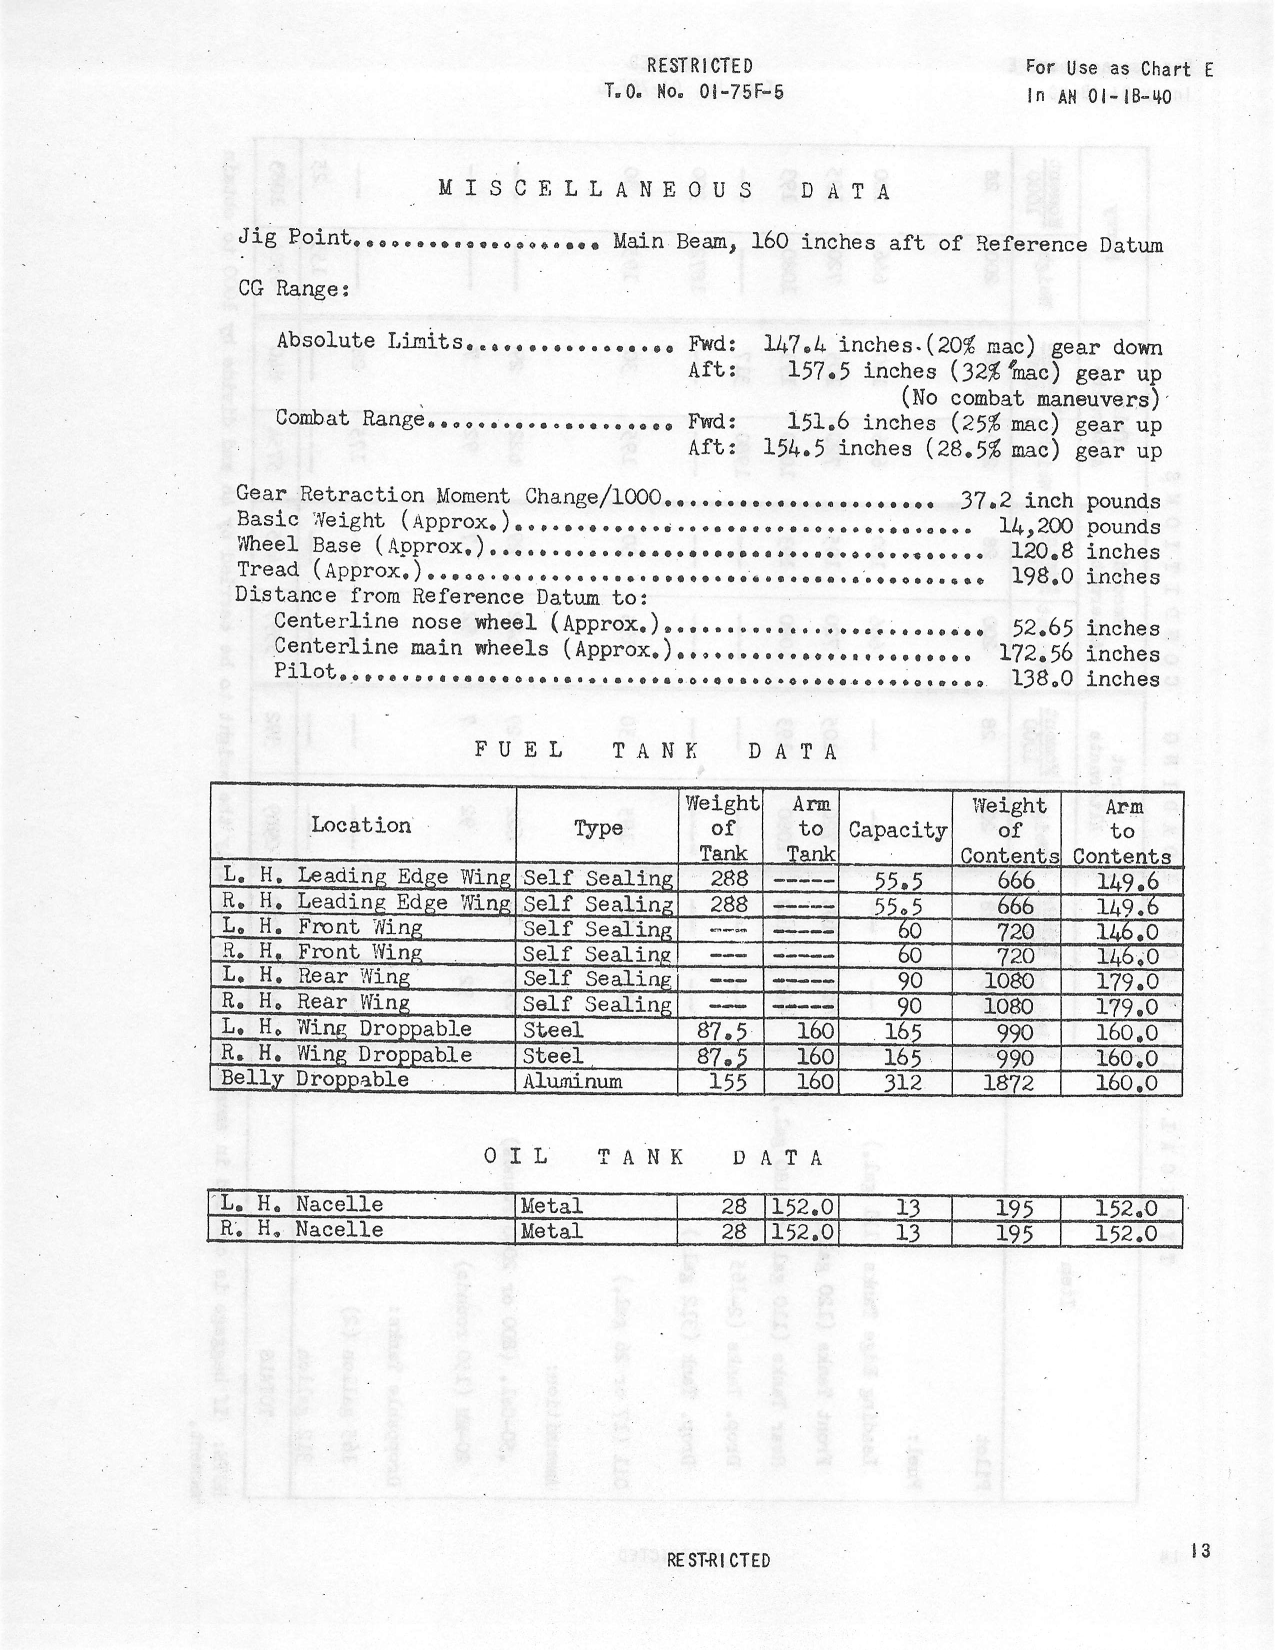 Sample page 15 from AirCorps Library document: Basic Weight Check List and Loading Data - P-38